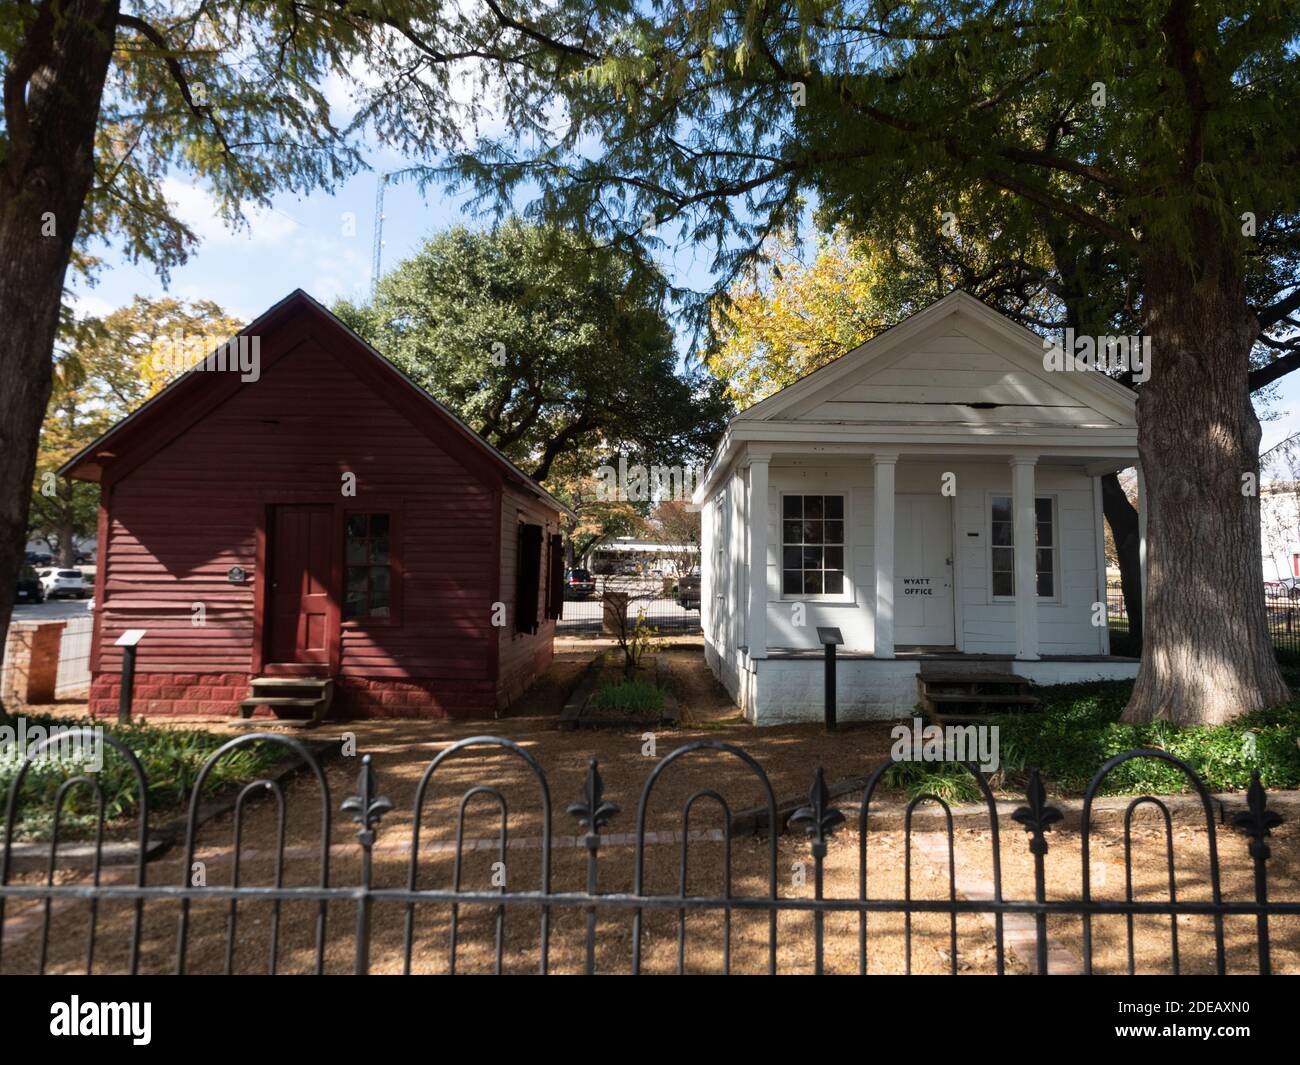 Old Wyatt Office, a Greek Revival building with columns, and the Calaboose,  a former jail, in Waxahachie, Texas beneath deciduous trees Stock Photo -  Alamy